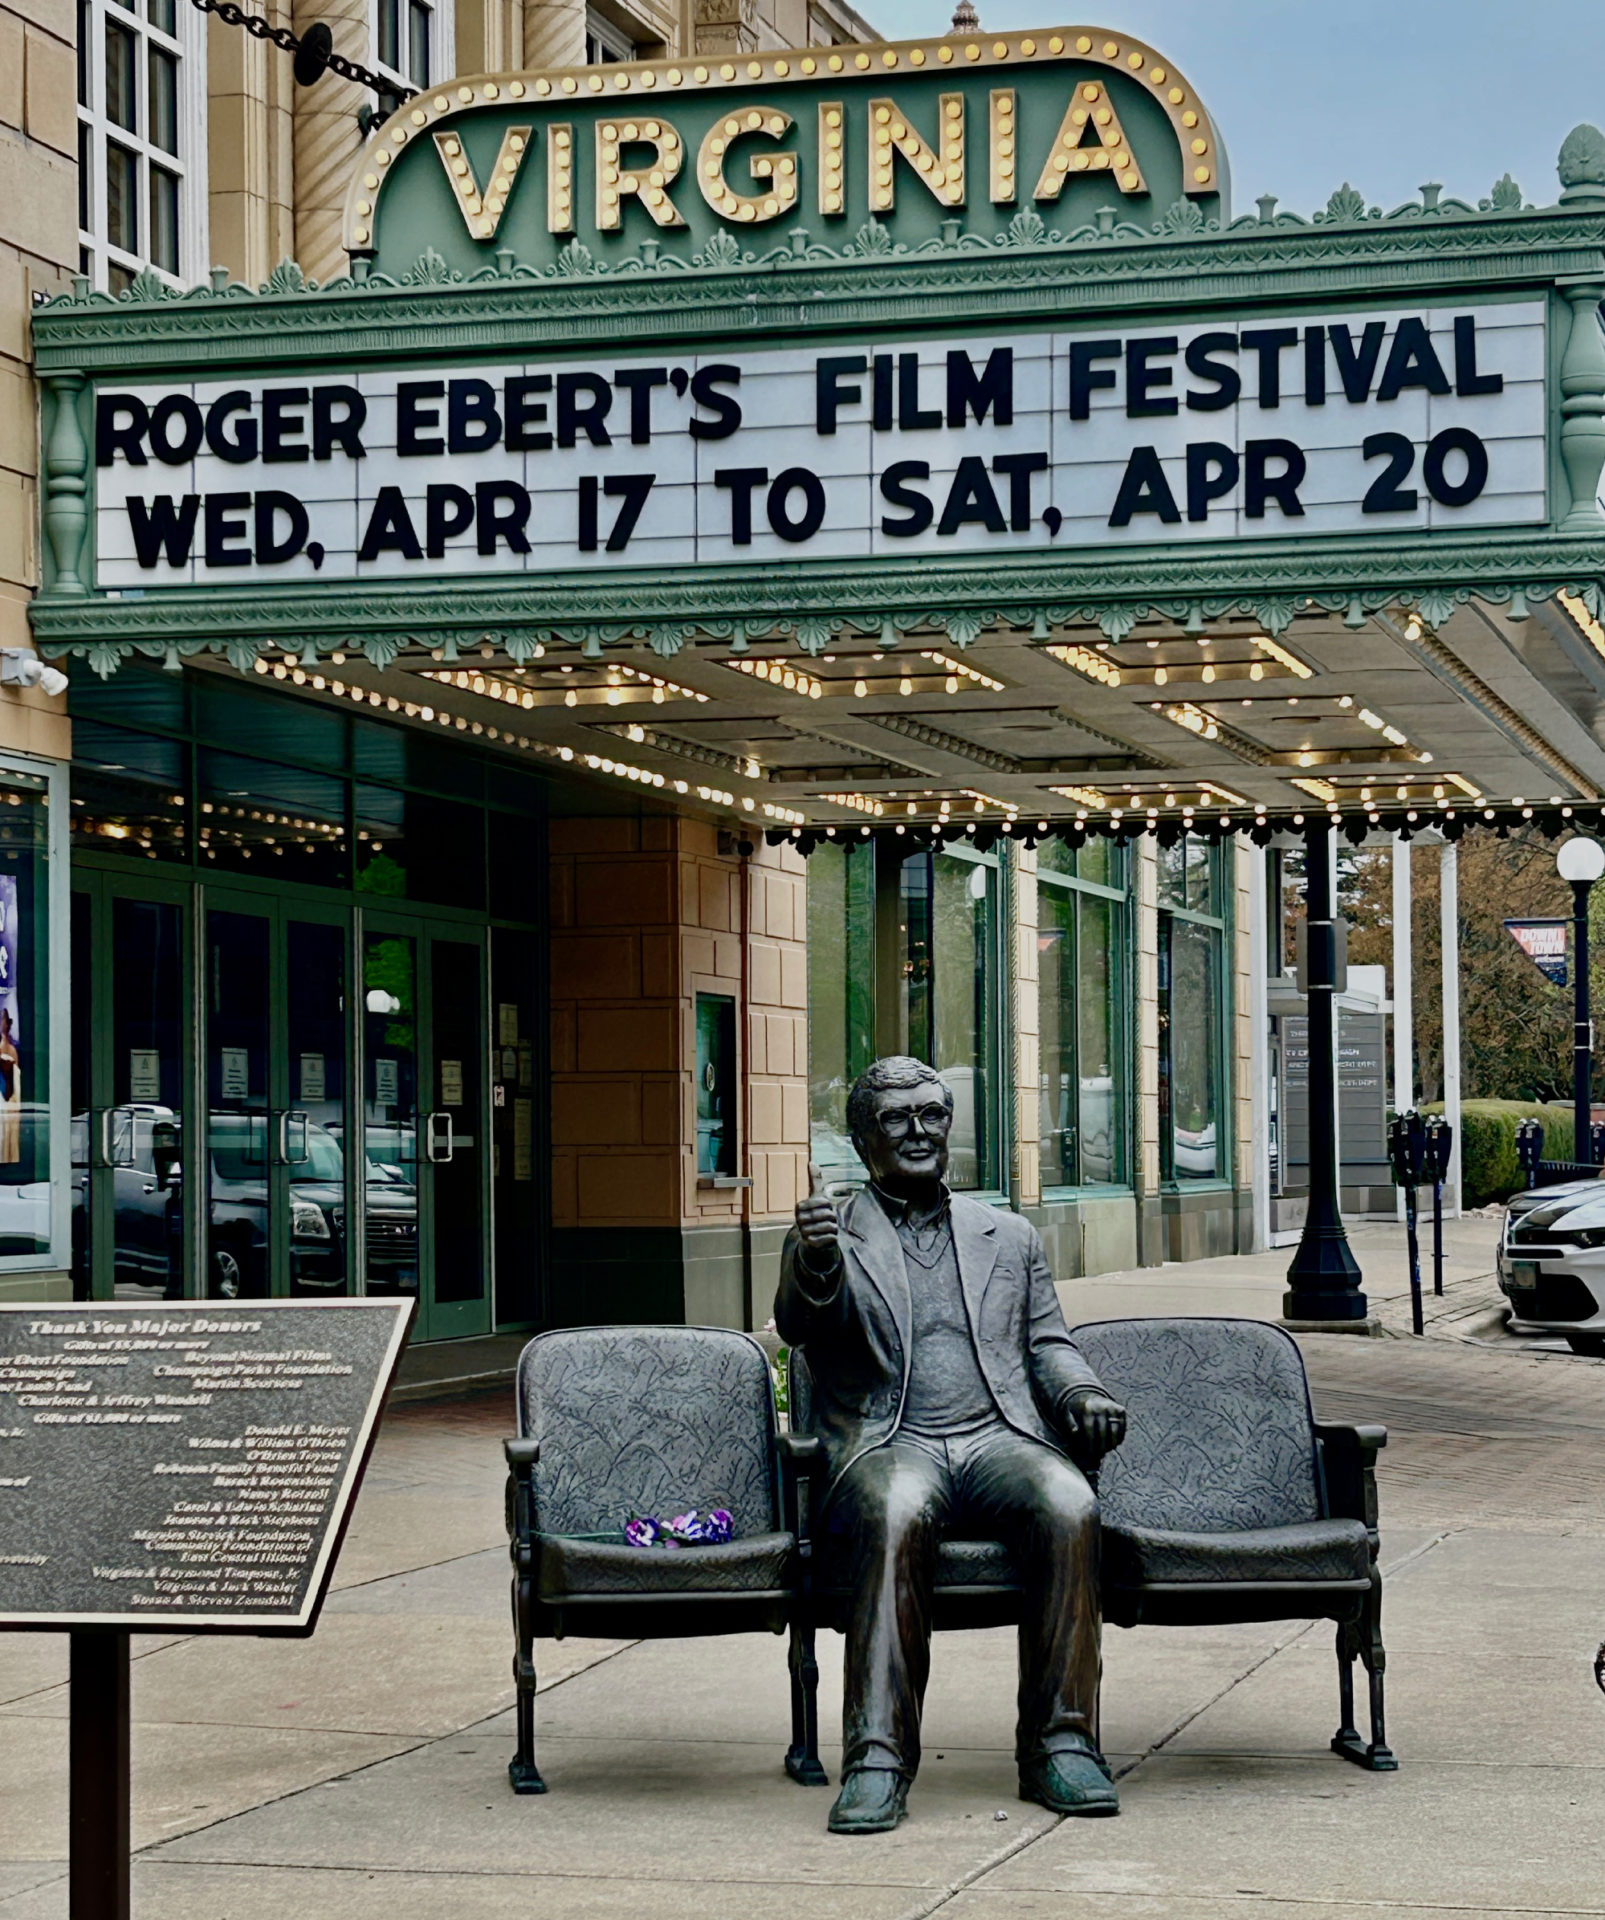 Roger Ebert’s Film Festival lights up Champaign’s Virginia Theatre this week